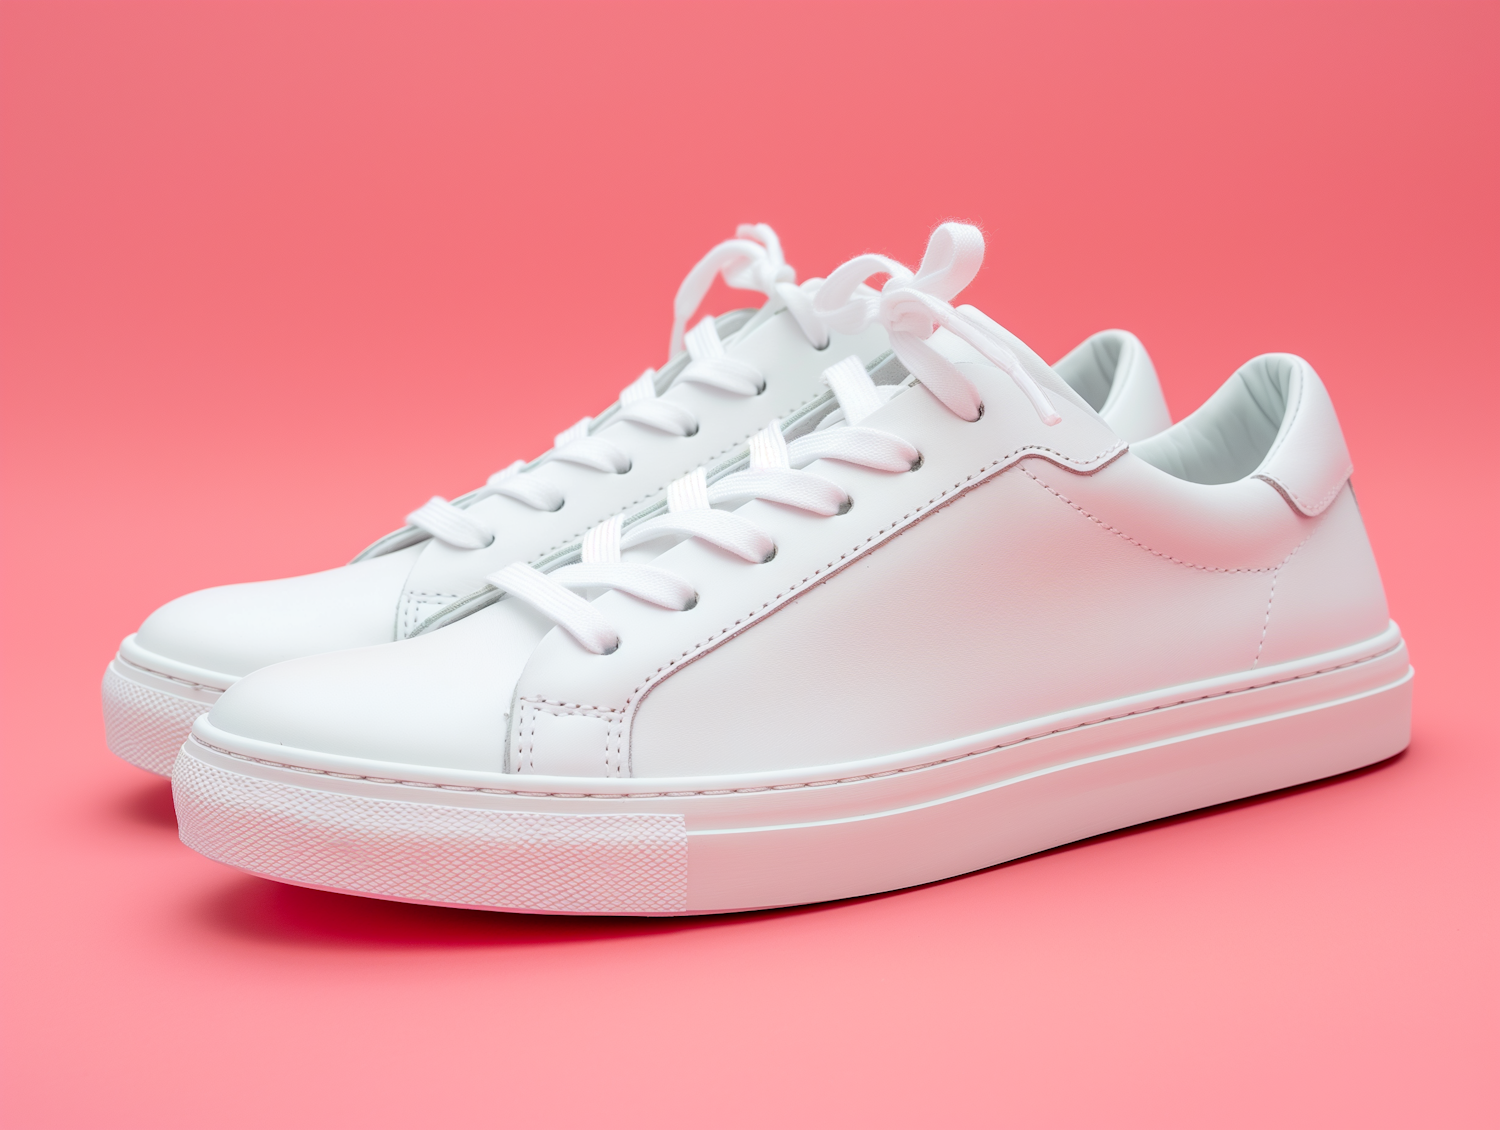 Pristine White Sneakers on Pink Background